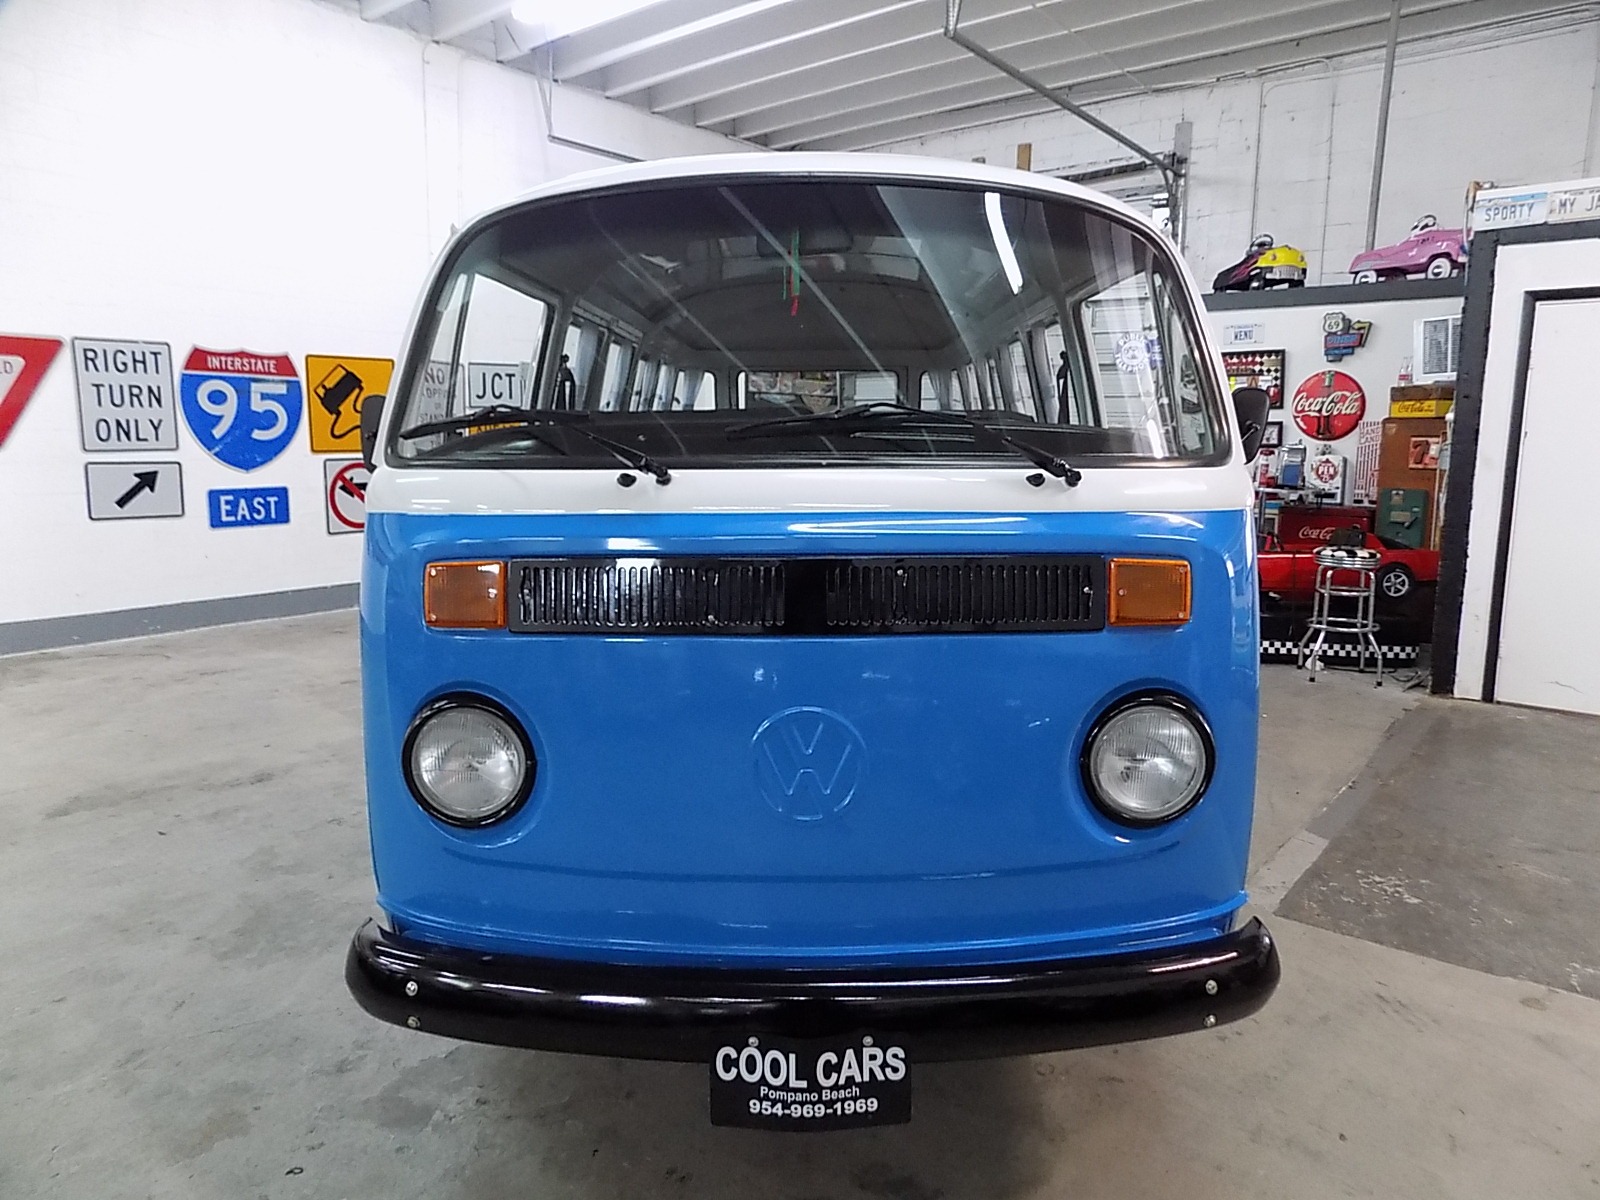 New 1995 VW VAN For Sale ($26,500) | Cool Cars For Sale Stock #10109